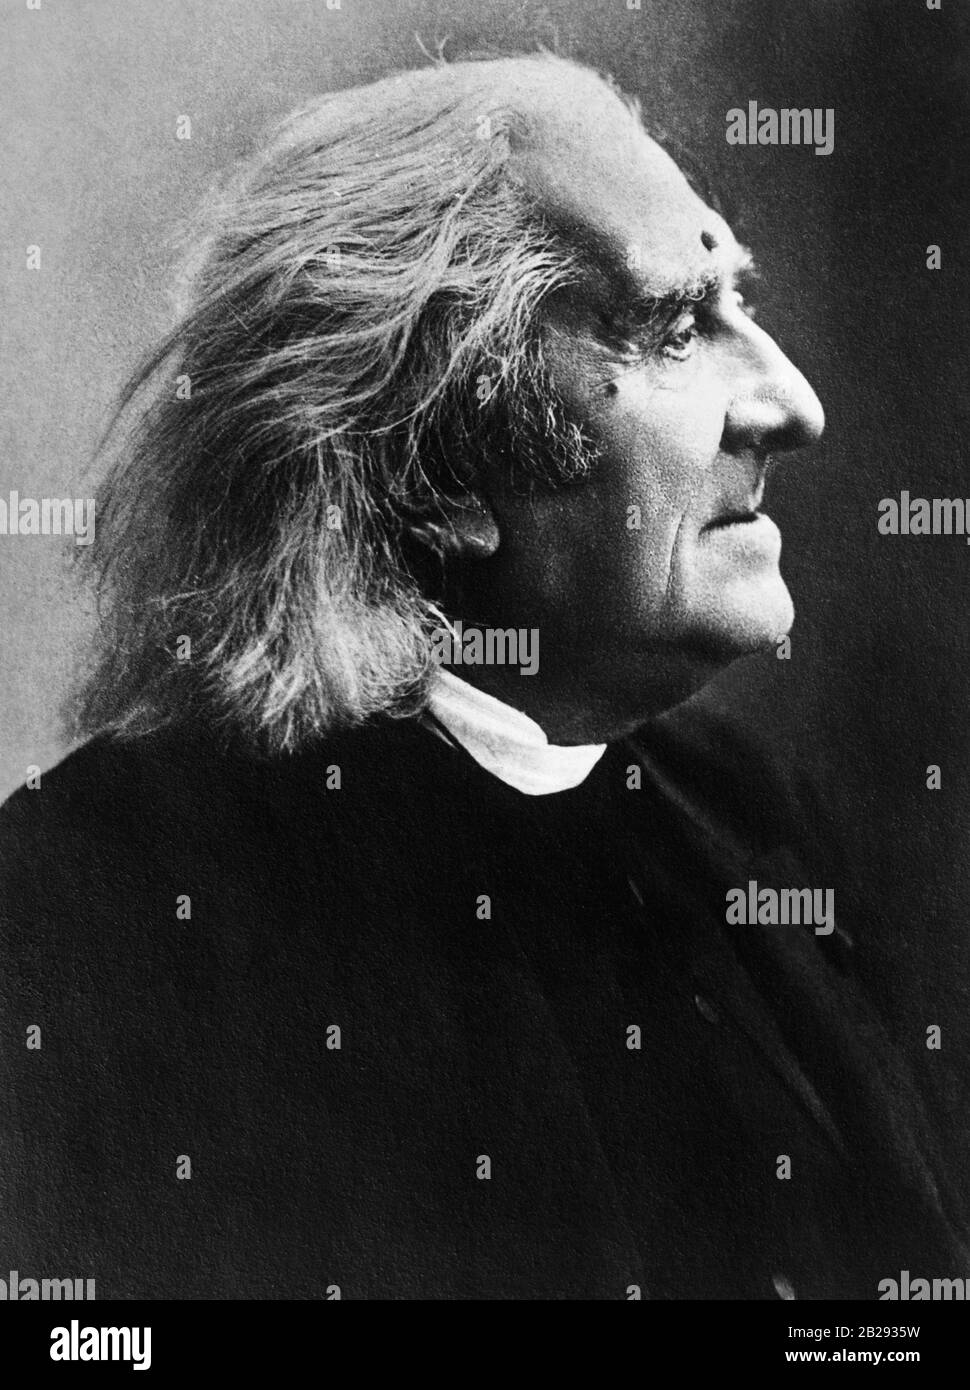 Vintage portrait photo of Hungarian composer and pianist Franz Liszt (1811 – 1886). Photo circa 1880 by Detroit Publishing Co. Stock Photo